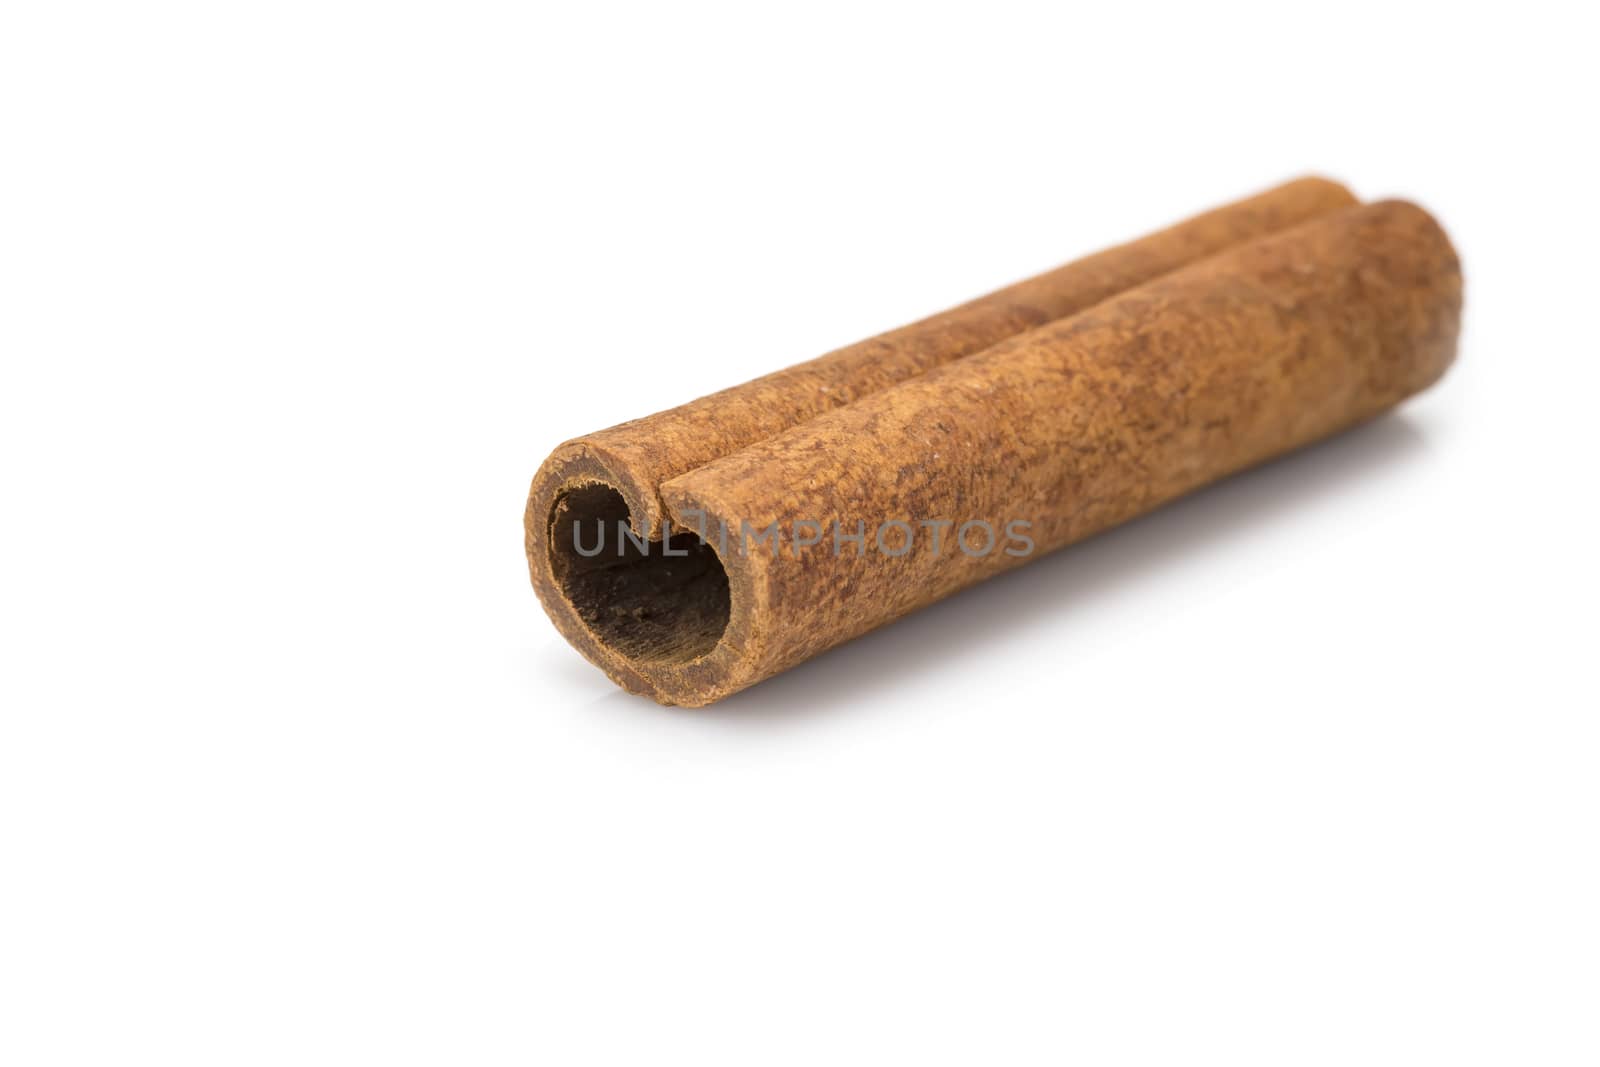 Cinnamon stick isolated over a white background